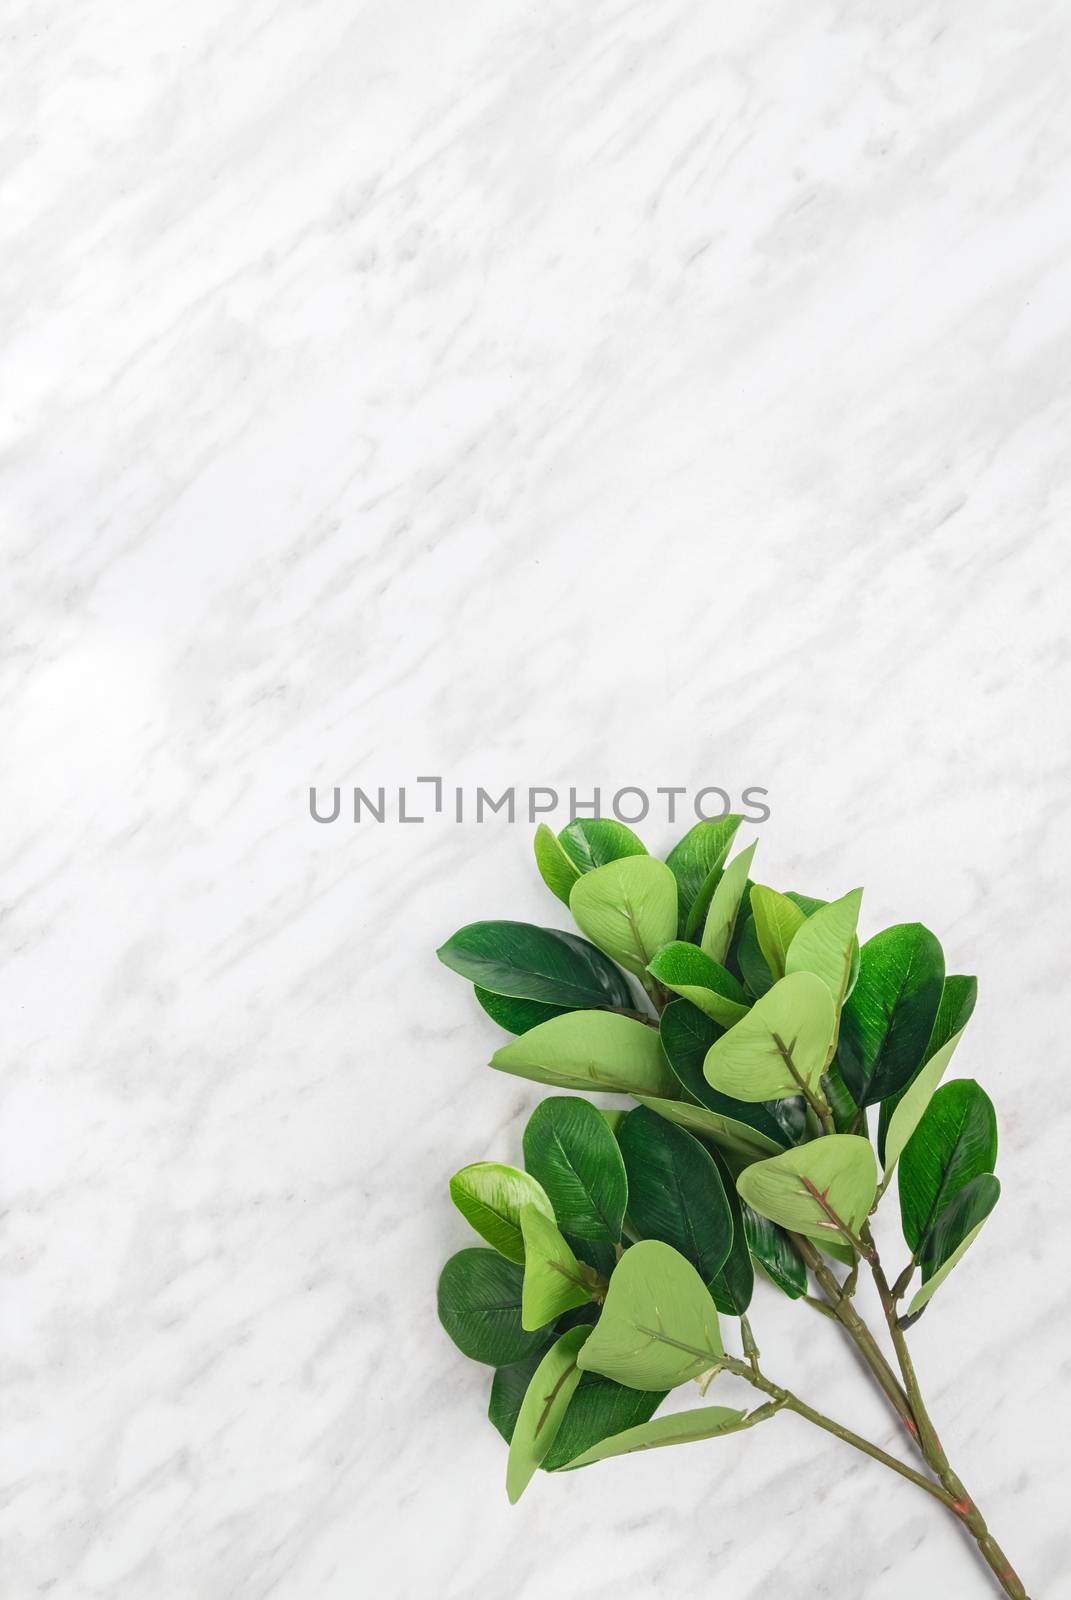 Ficus tree branch on marble background by anikasalsera